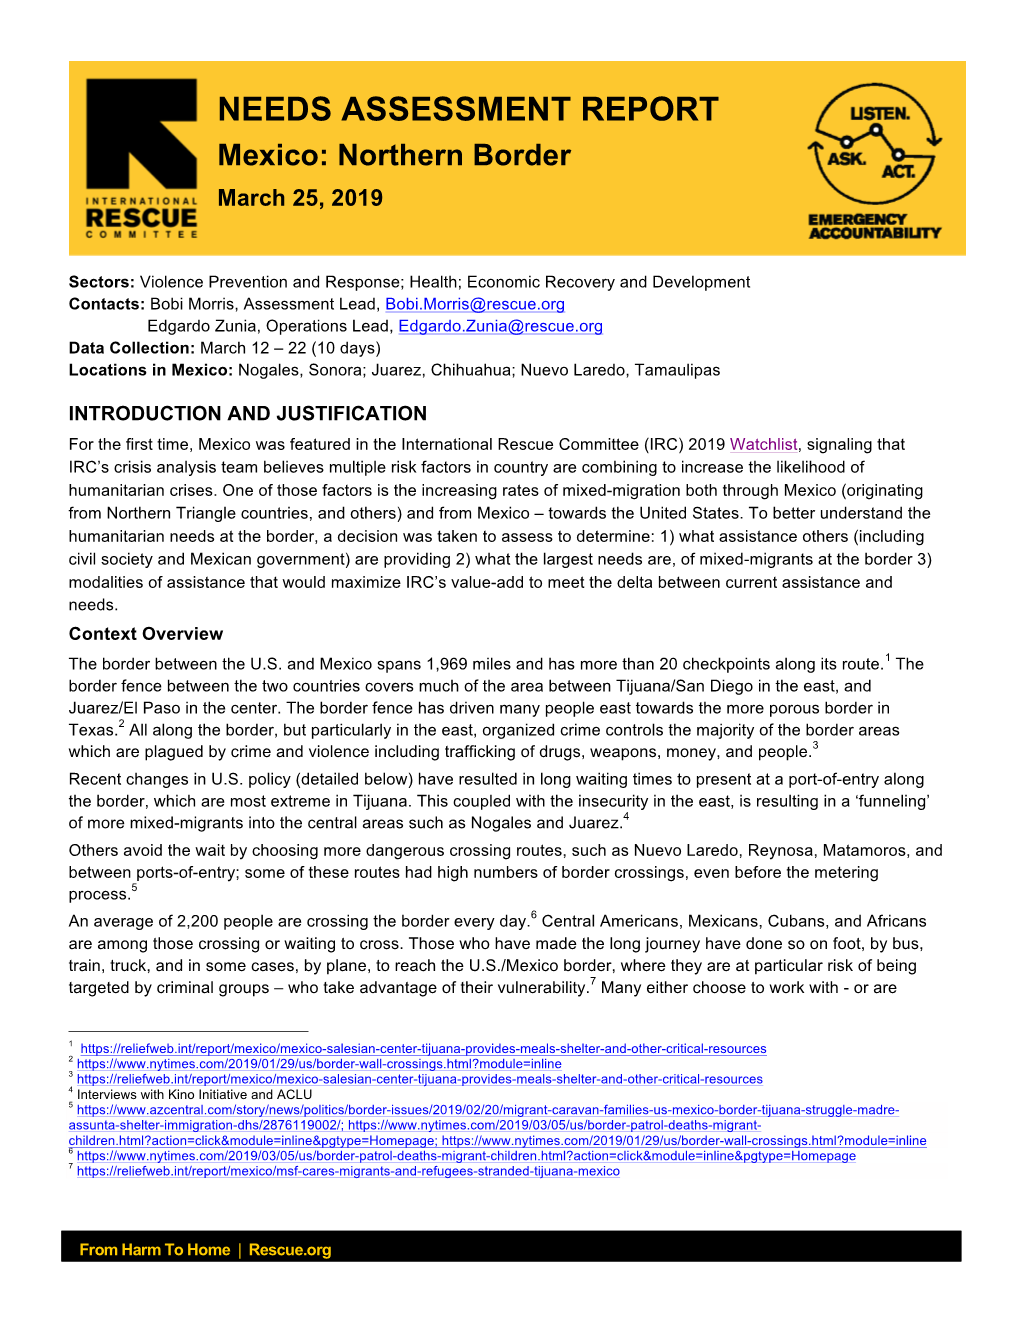 IRC Needs Assessment Report: Mexico-Northern Border